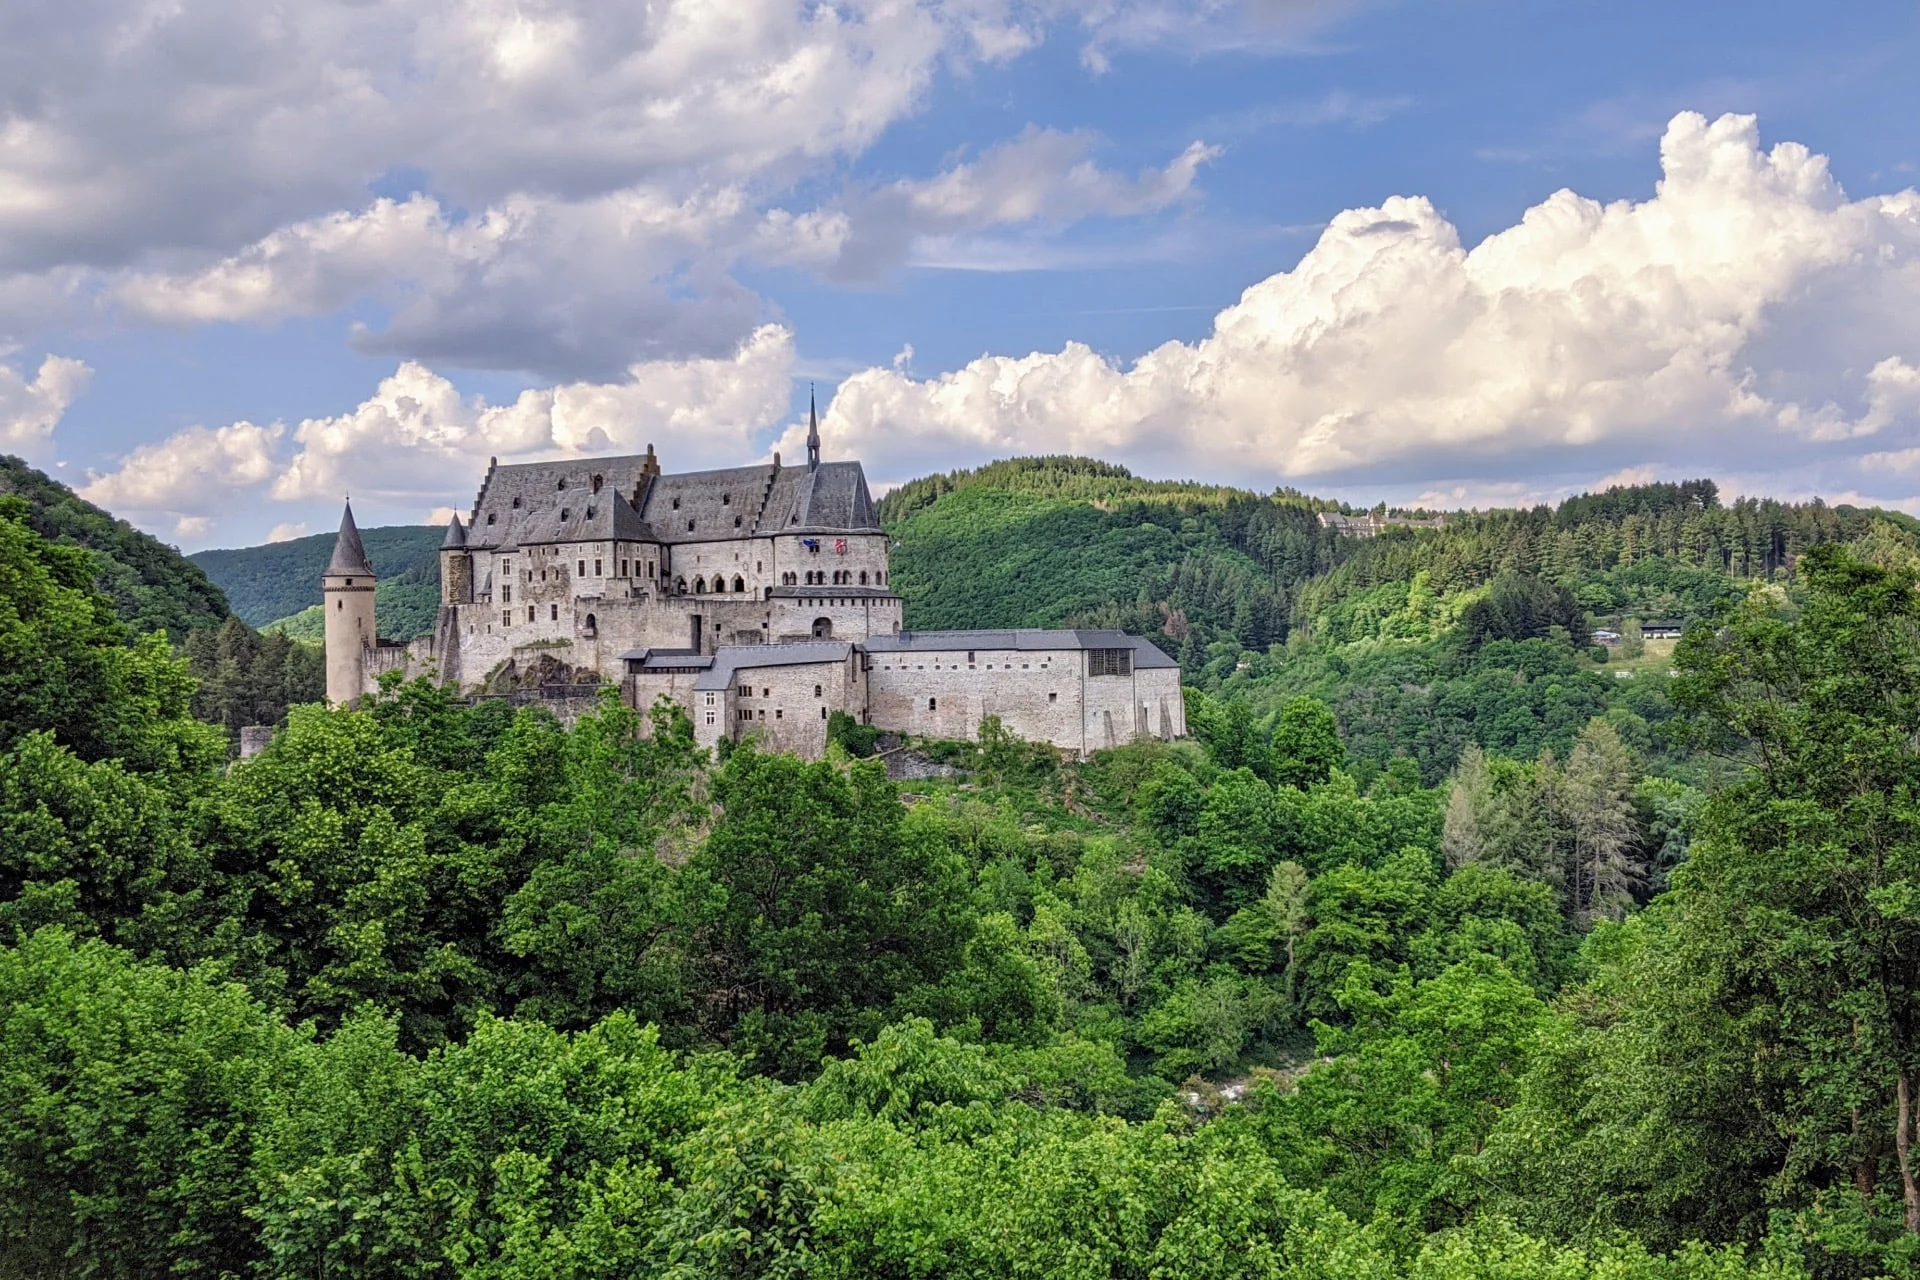 A castle on a hill surrounded by trees with vianden castle in the background.